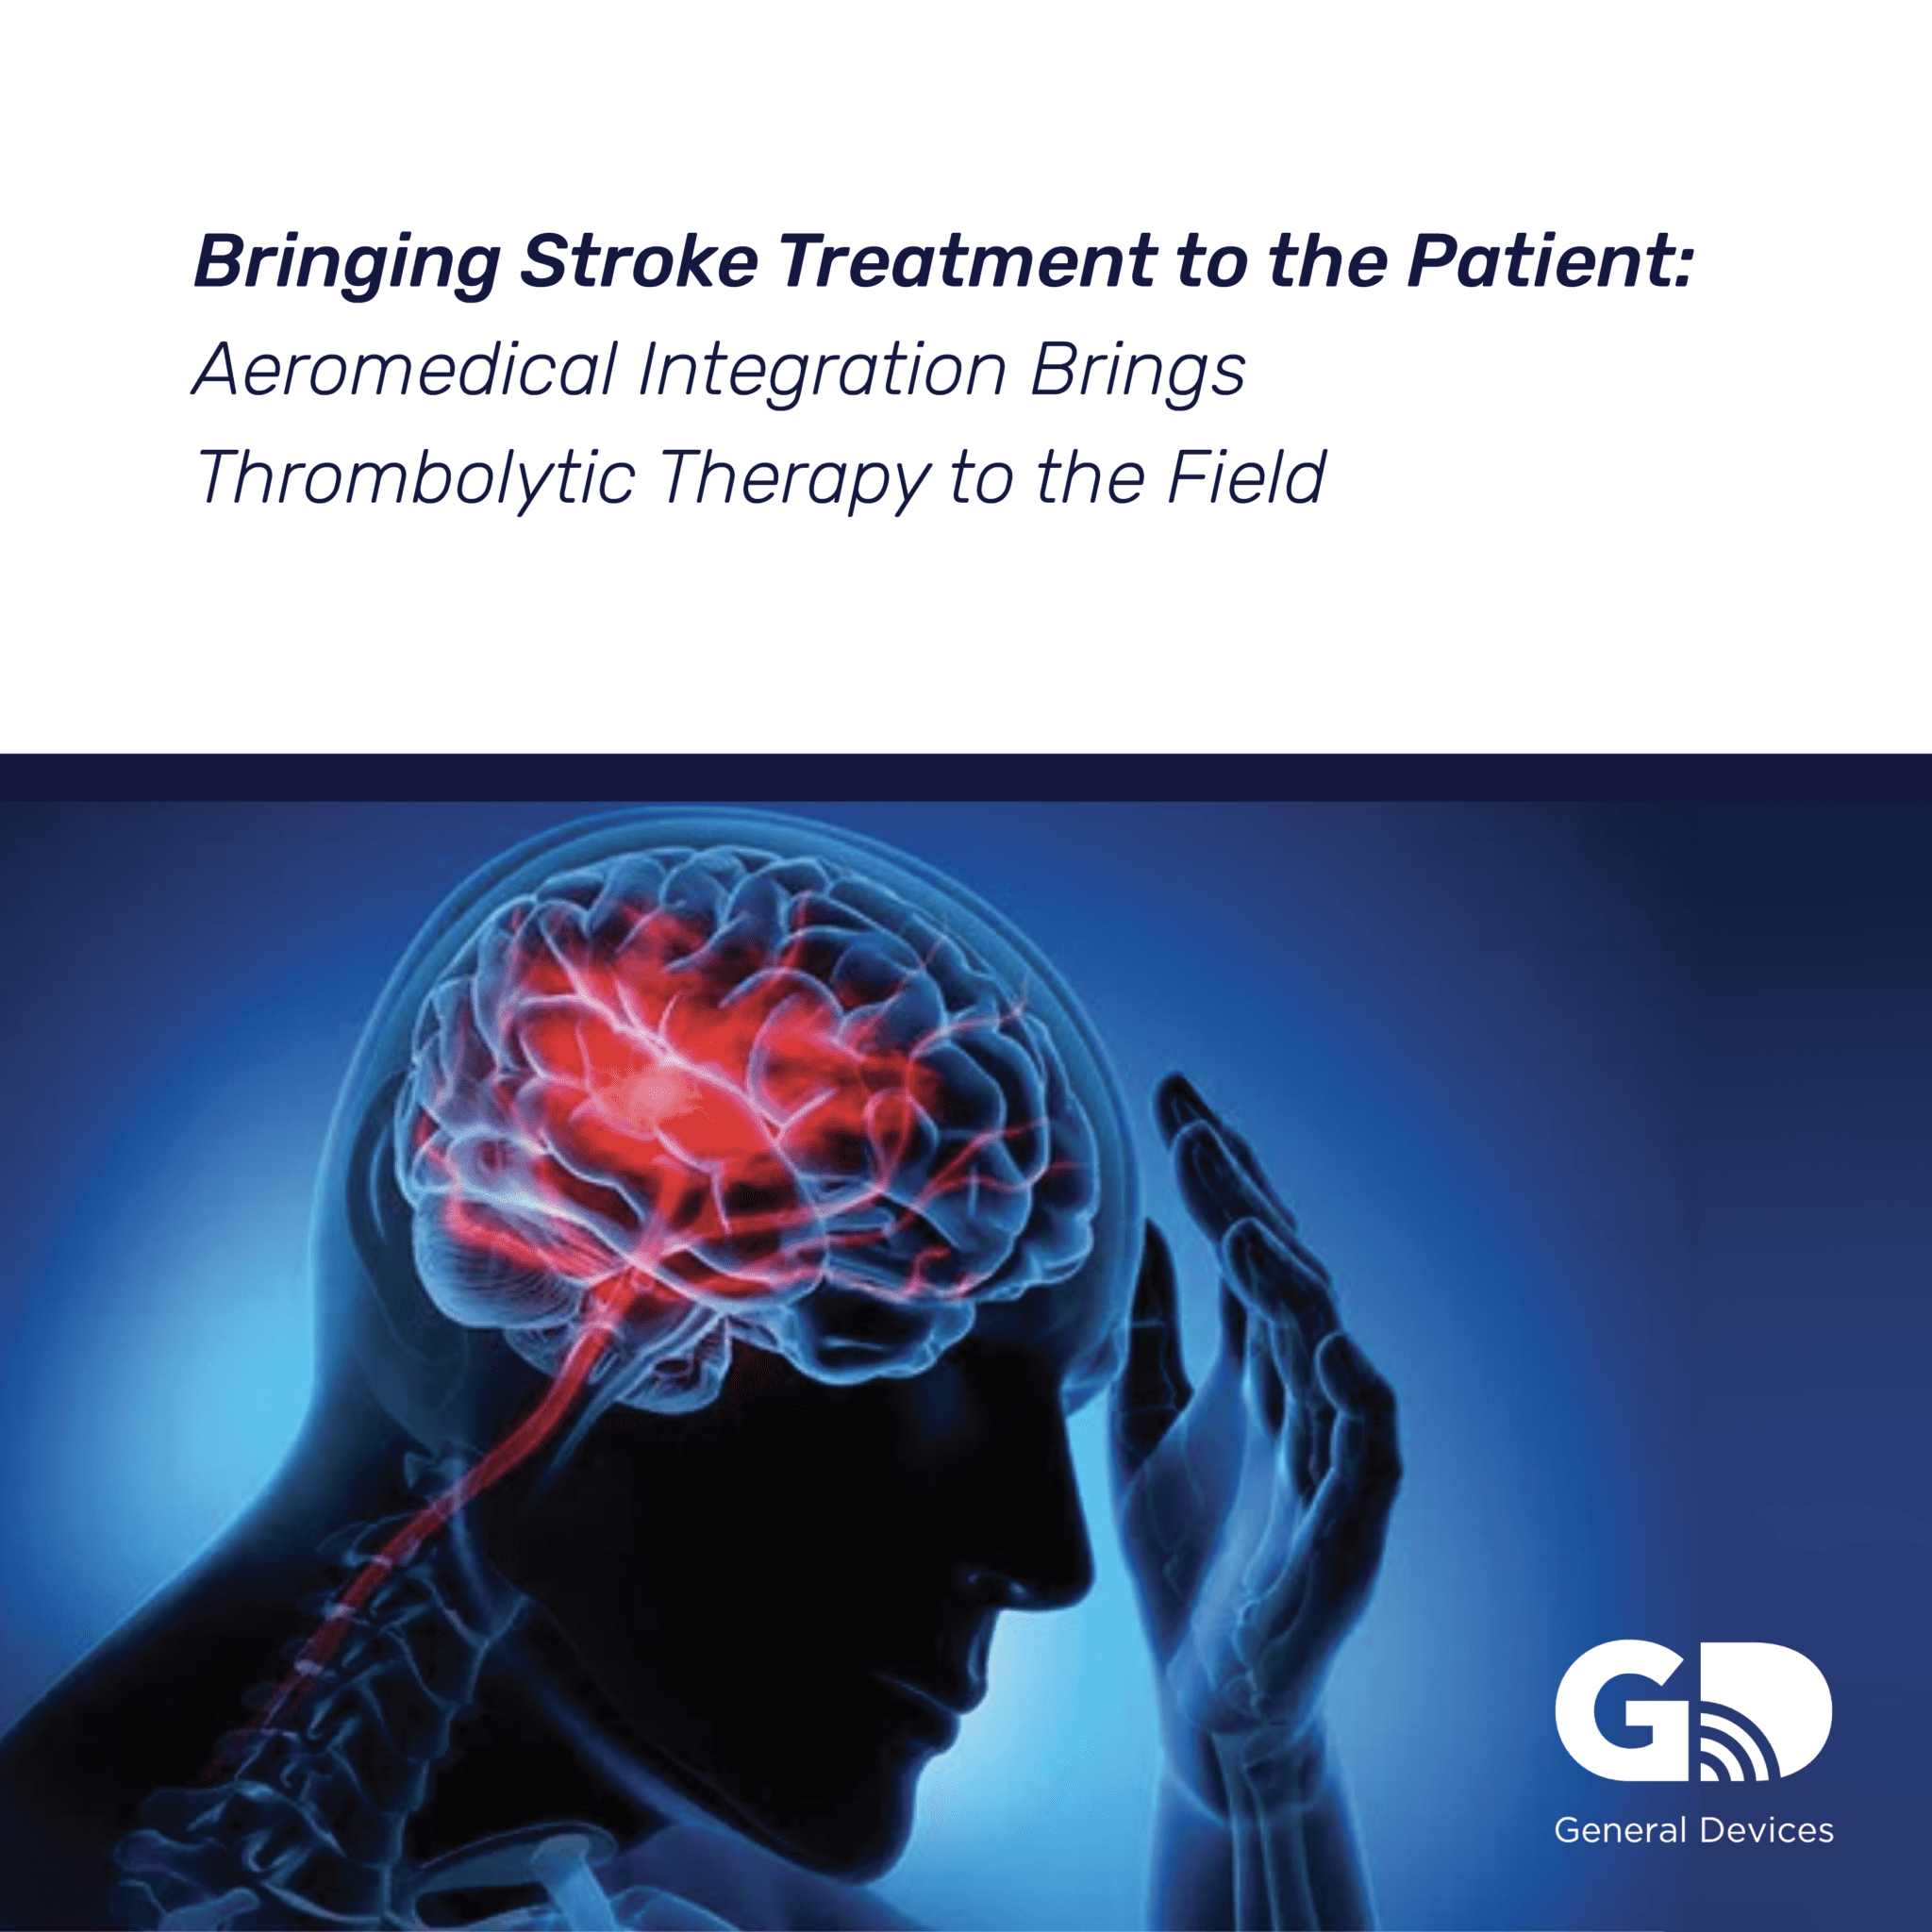 Bringing Stroke Treatment to the Patient